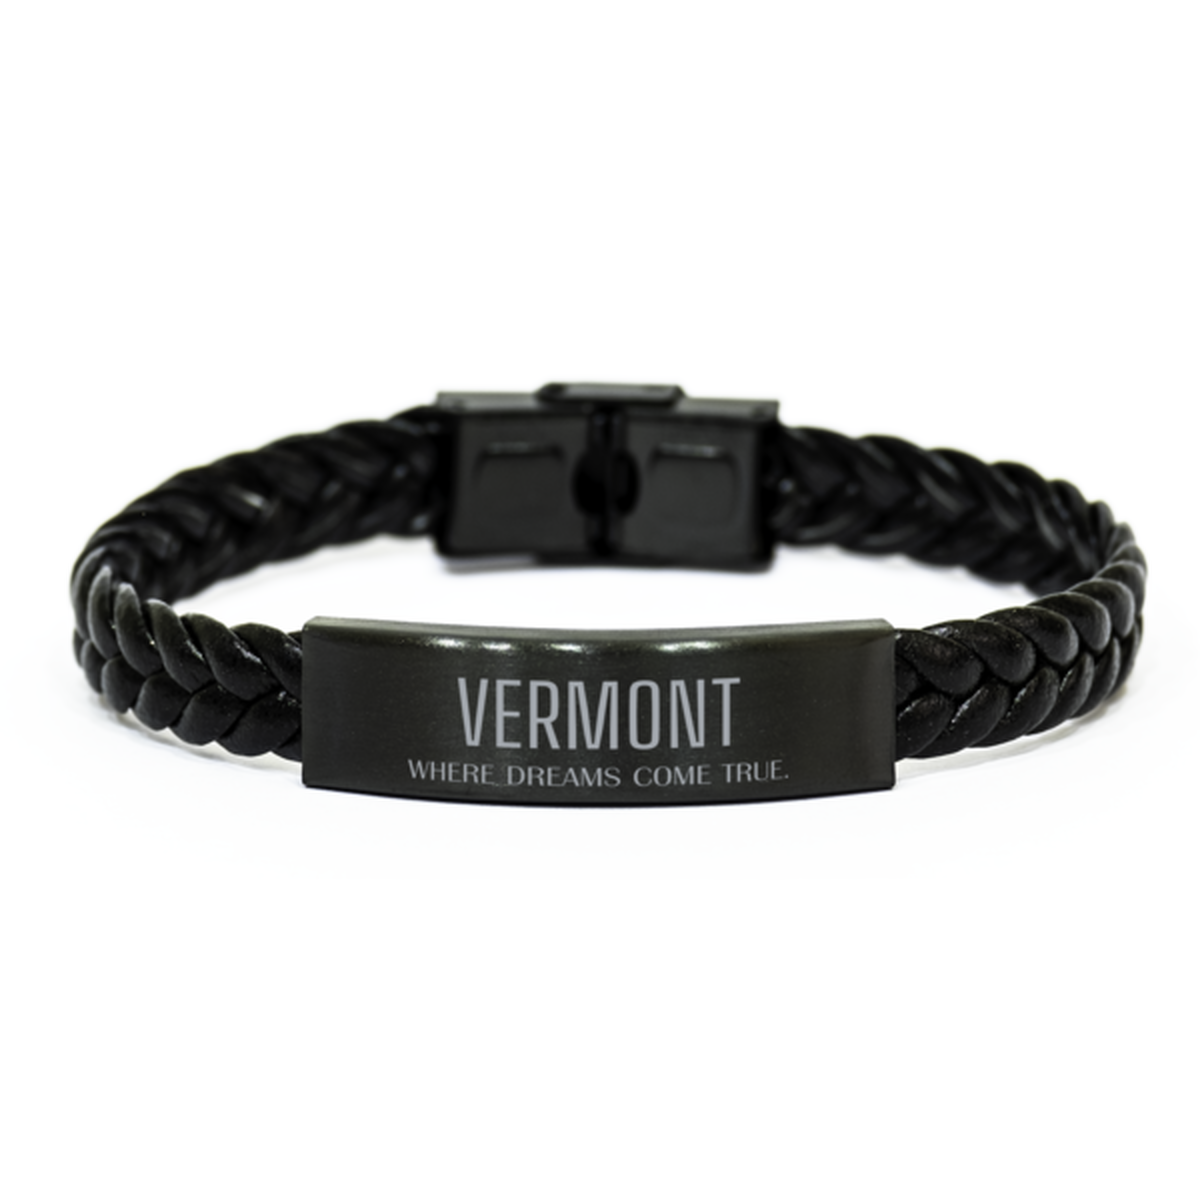 Love Vermont State Braided Leather Bracelet, Vermont Where dreams come true, Birthday Inspirational Gifts For Vermont Men, Women, Friends